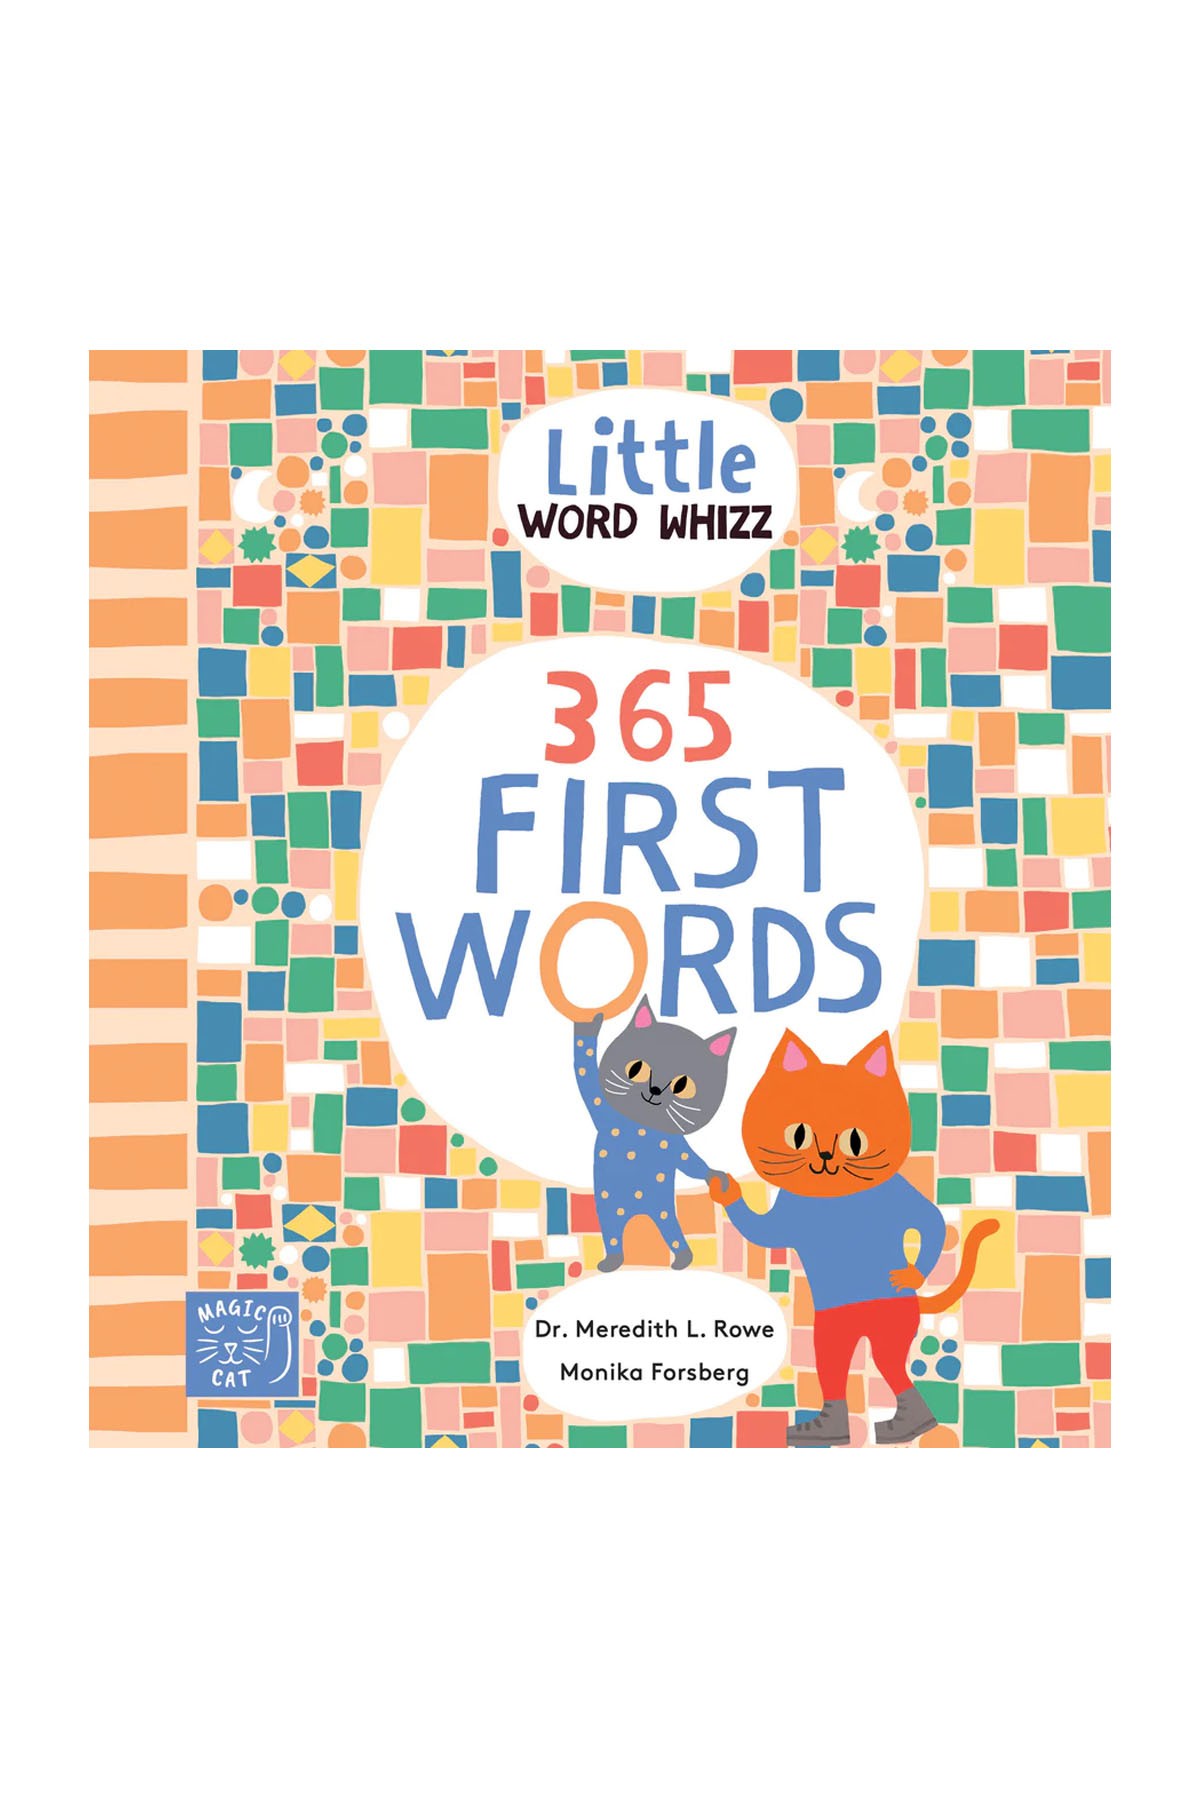 Magic Cat - 365 First Words